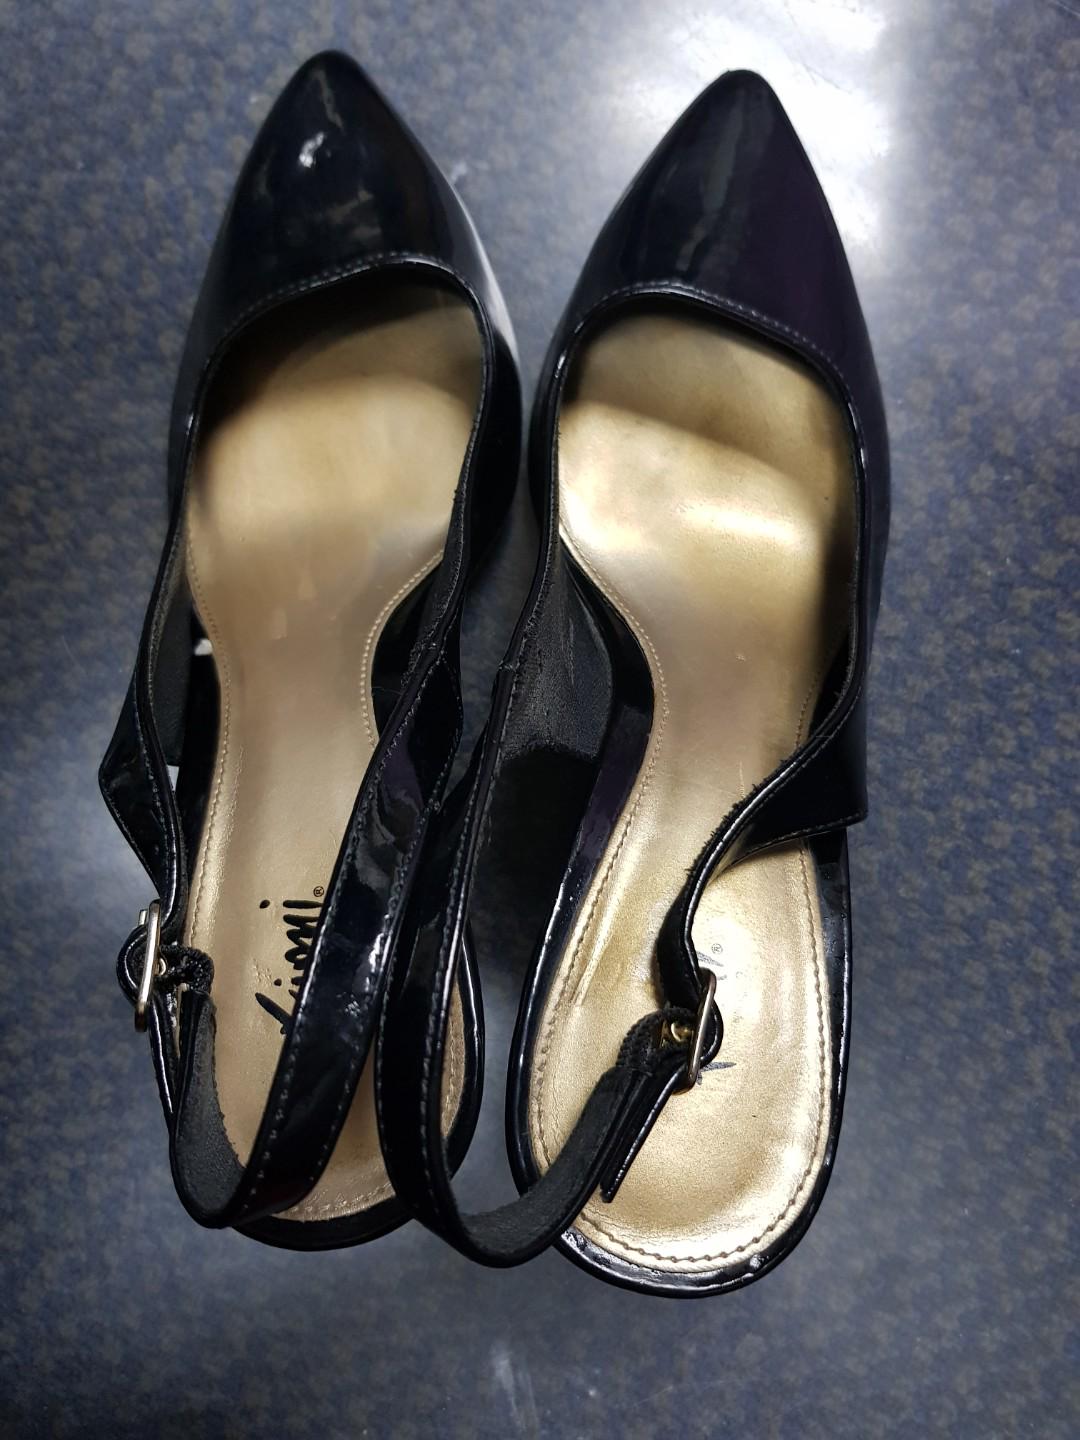 payless ladies shoes